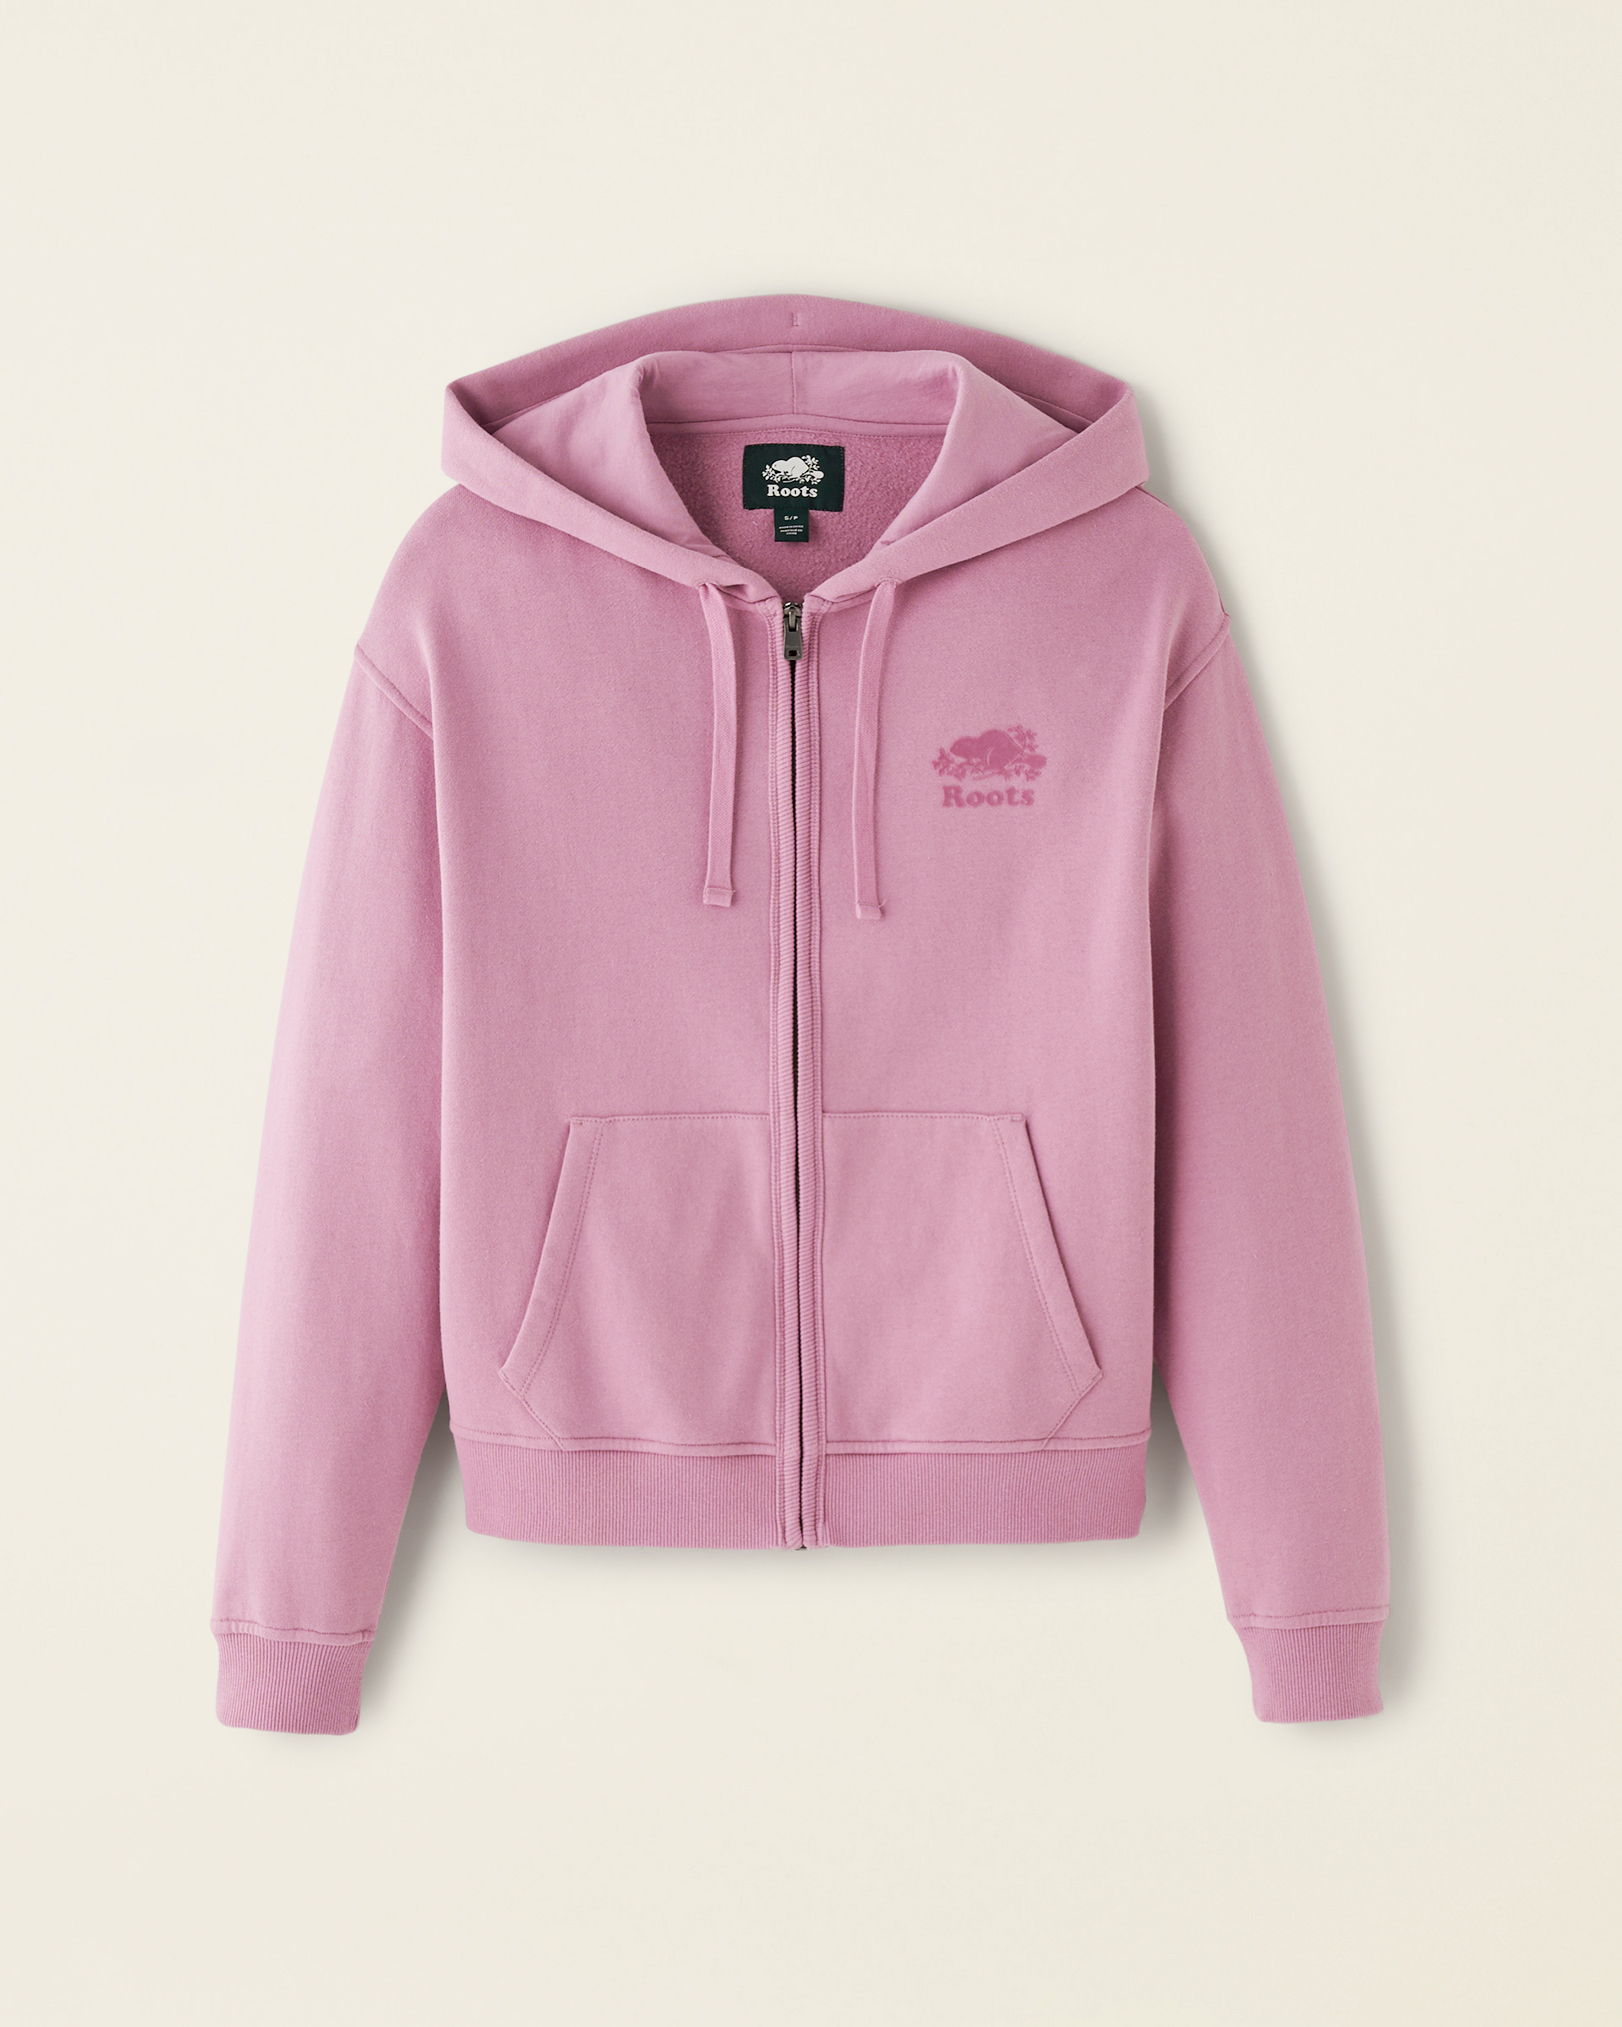 Roots Organic Original Relaxed Full Zip Hoodie in Orchid Haze